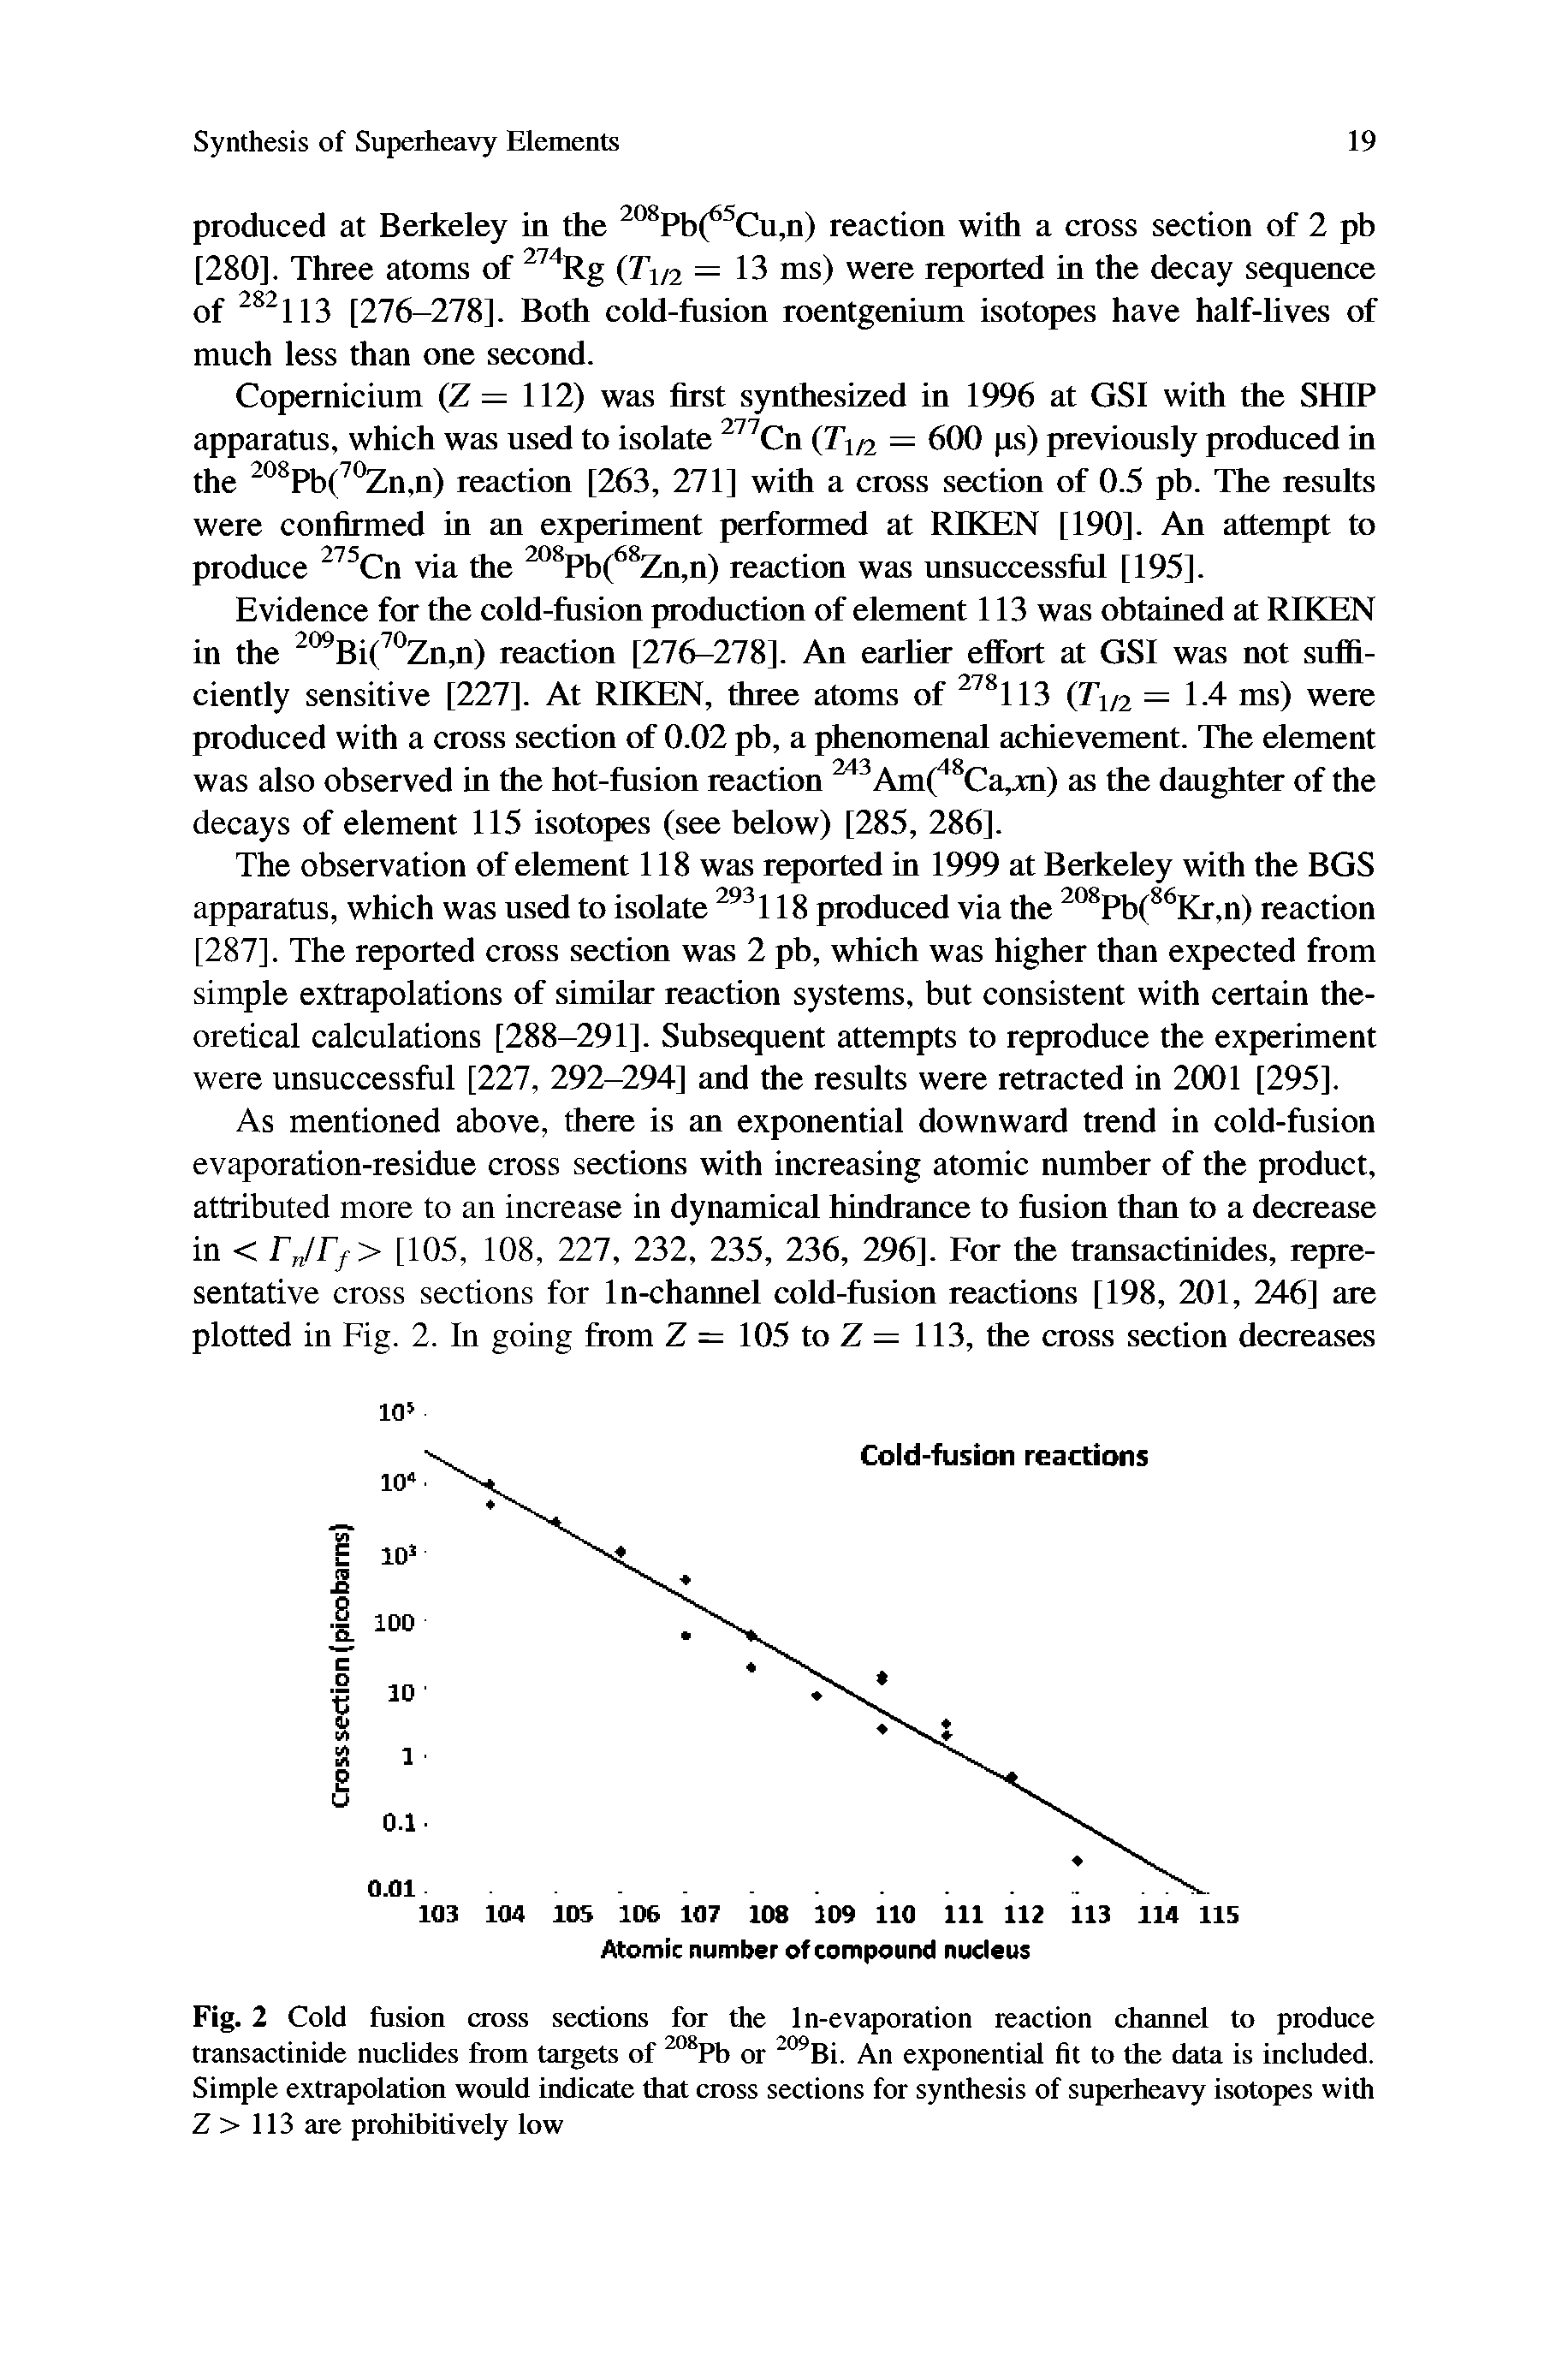 Fig. 2 Cold fusion cross sections for the In-evaporation reaction charmel to produce transactinide nuclides fiom targets of or An exponential fit to the data is included. Simple extrapolation would indicate that cross sections for synthesis of superheavy isotopes with Z > 113 are prohibitively low...